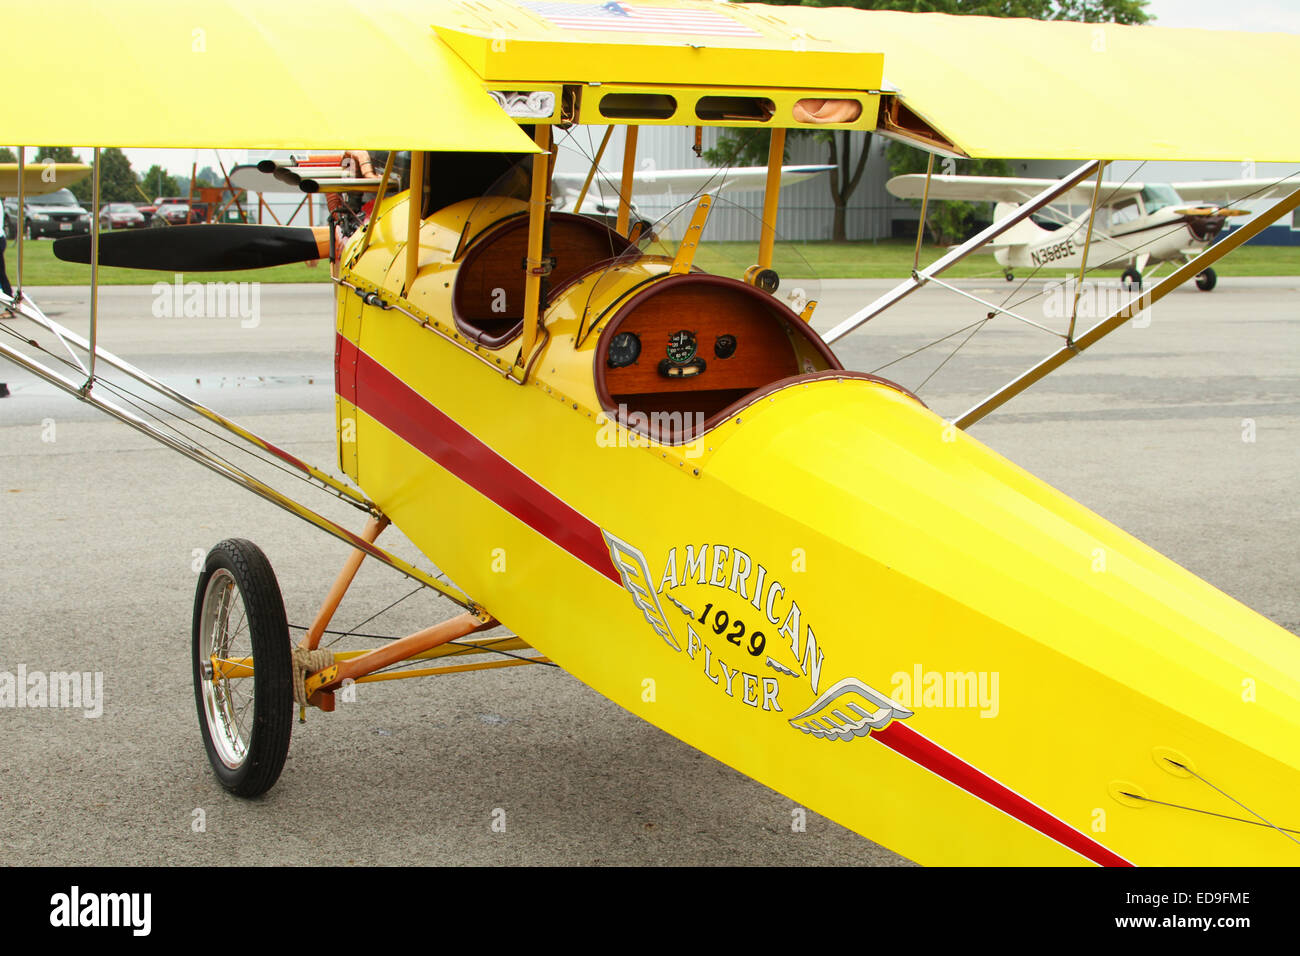 Pietenpol Air Camper. Yellow Airplane. Possibly custom built experimental or a replica of an earlier plane. Circa 2001 per the r Stock Photo